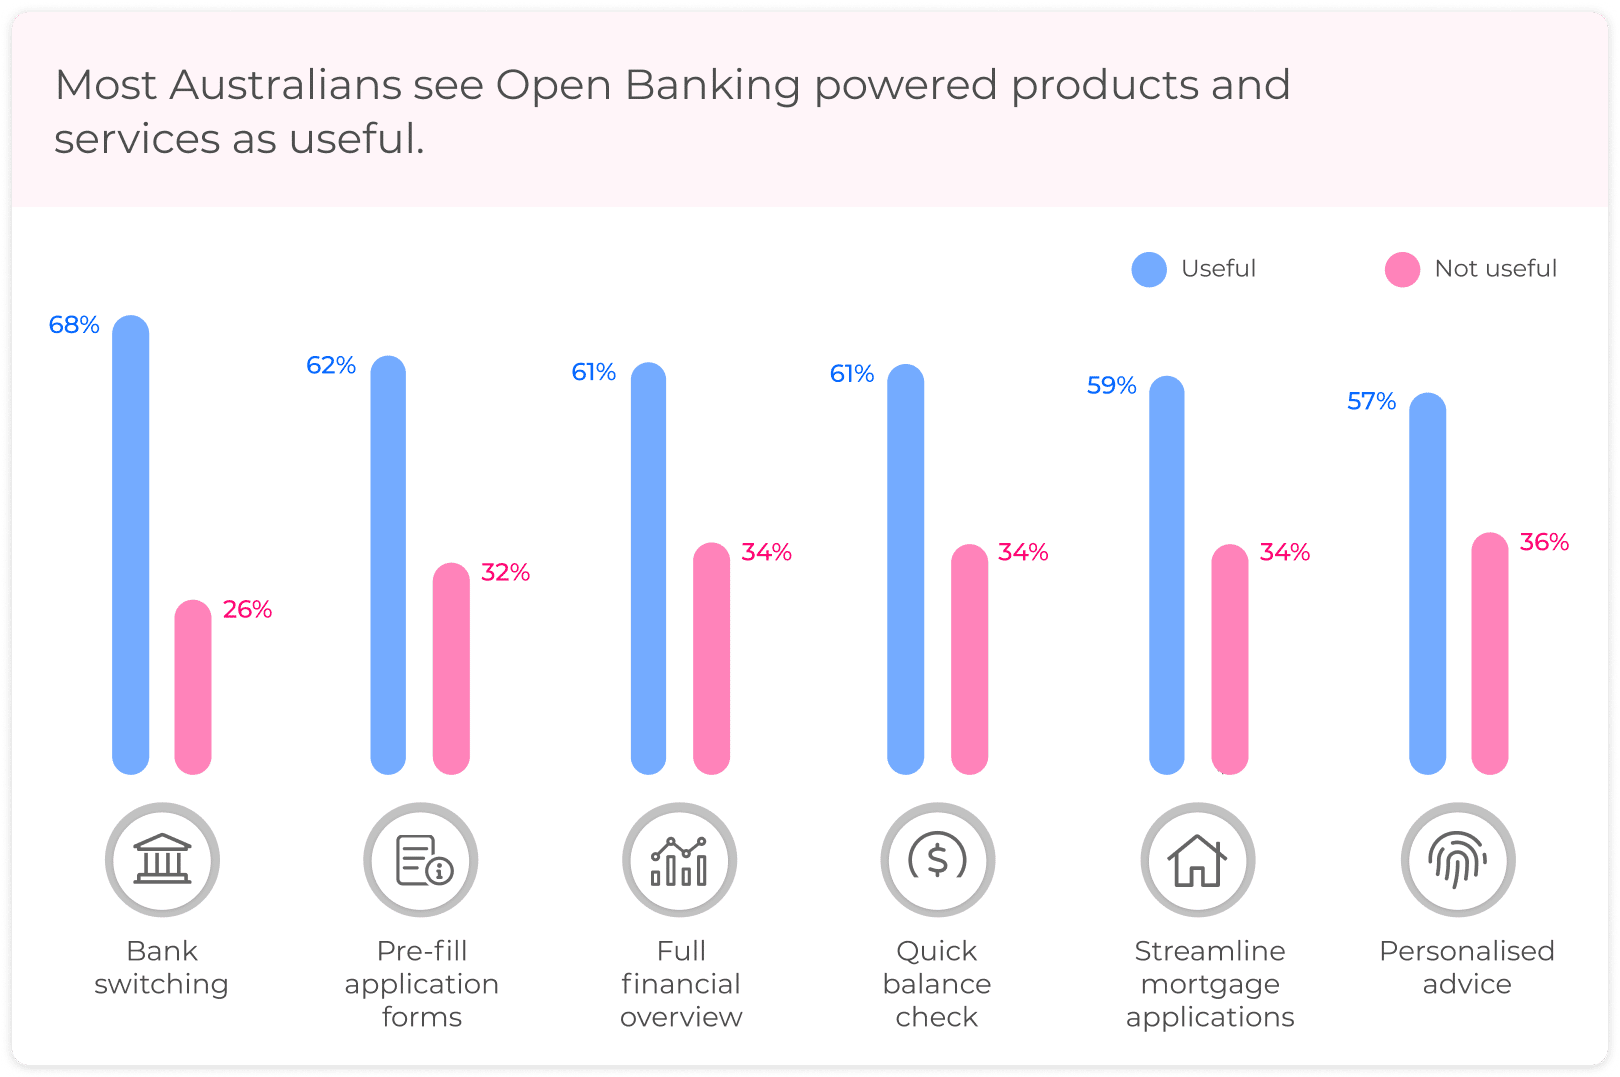 Open banking consumer perspective - Most Australians see Open Banking powered products and services as useful